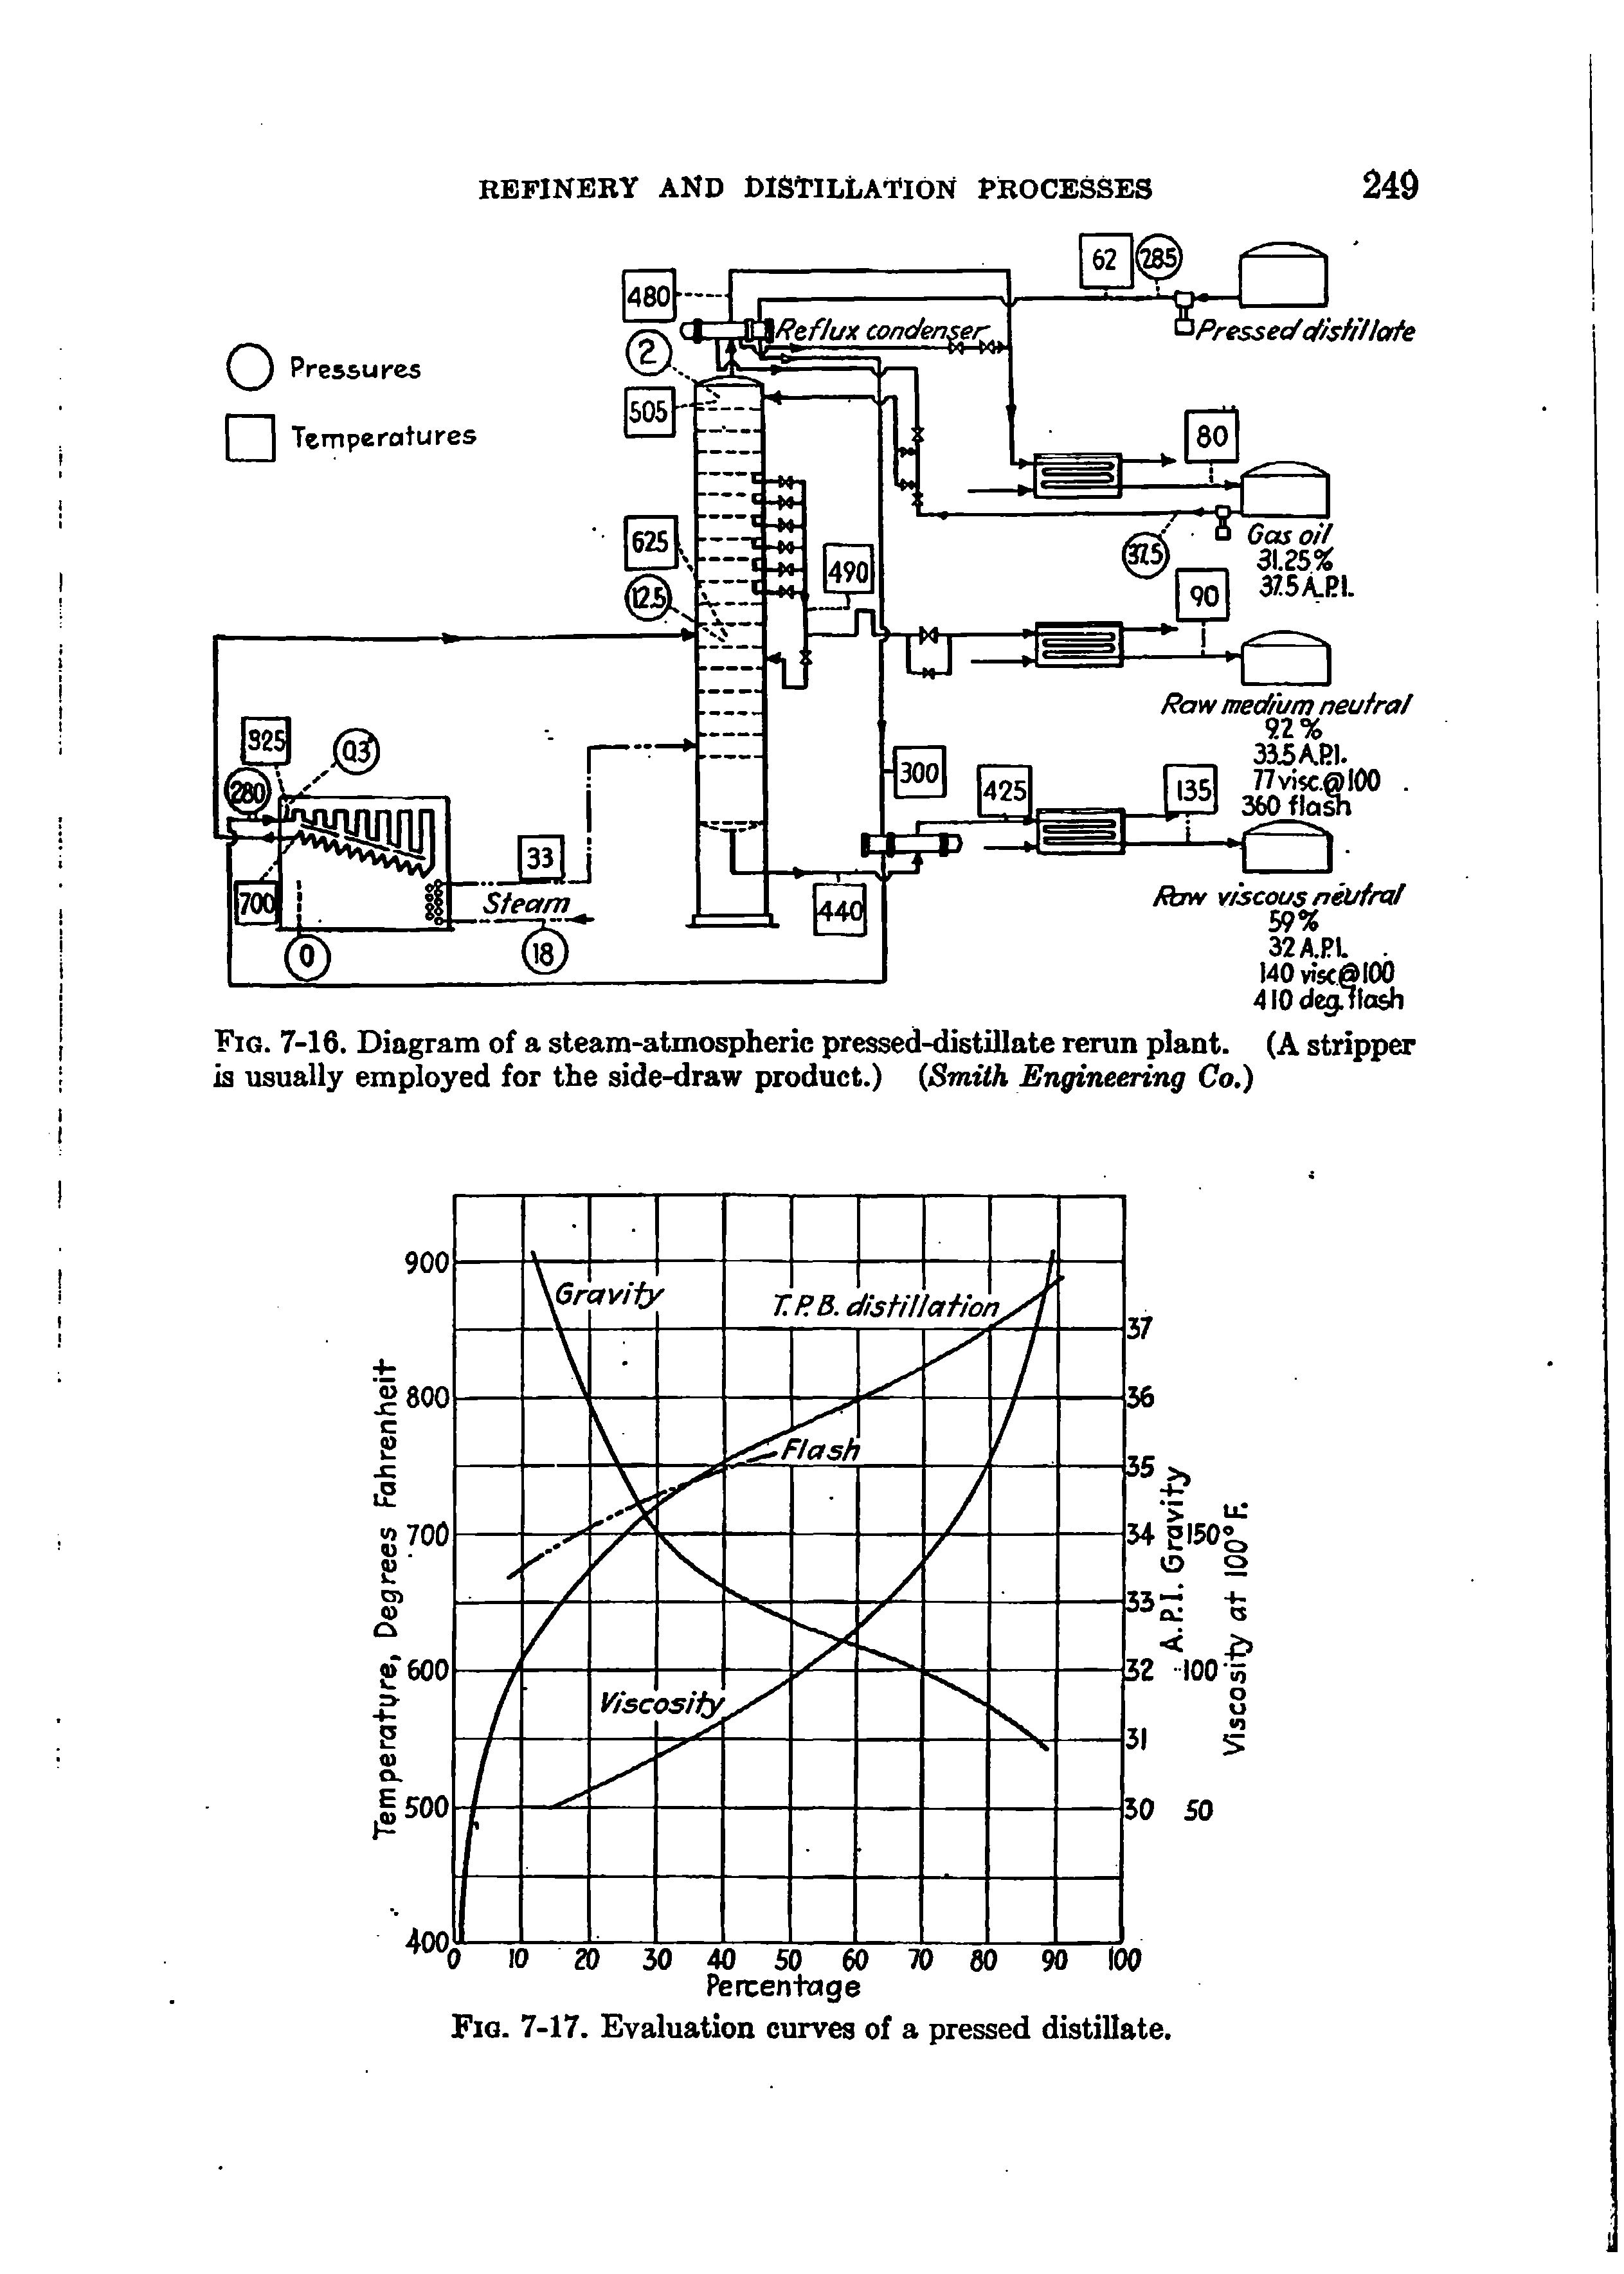 Fig. 7-16. Diagram of a steam-atmospheric pressed-distillate rerun plant. (A stripper is usually employed for the side-draw product.) Srrdih Engineering Co,)...